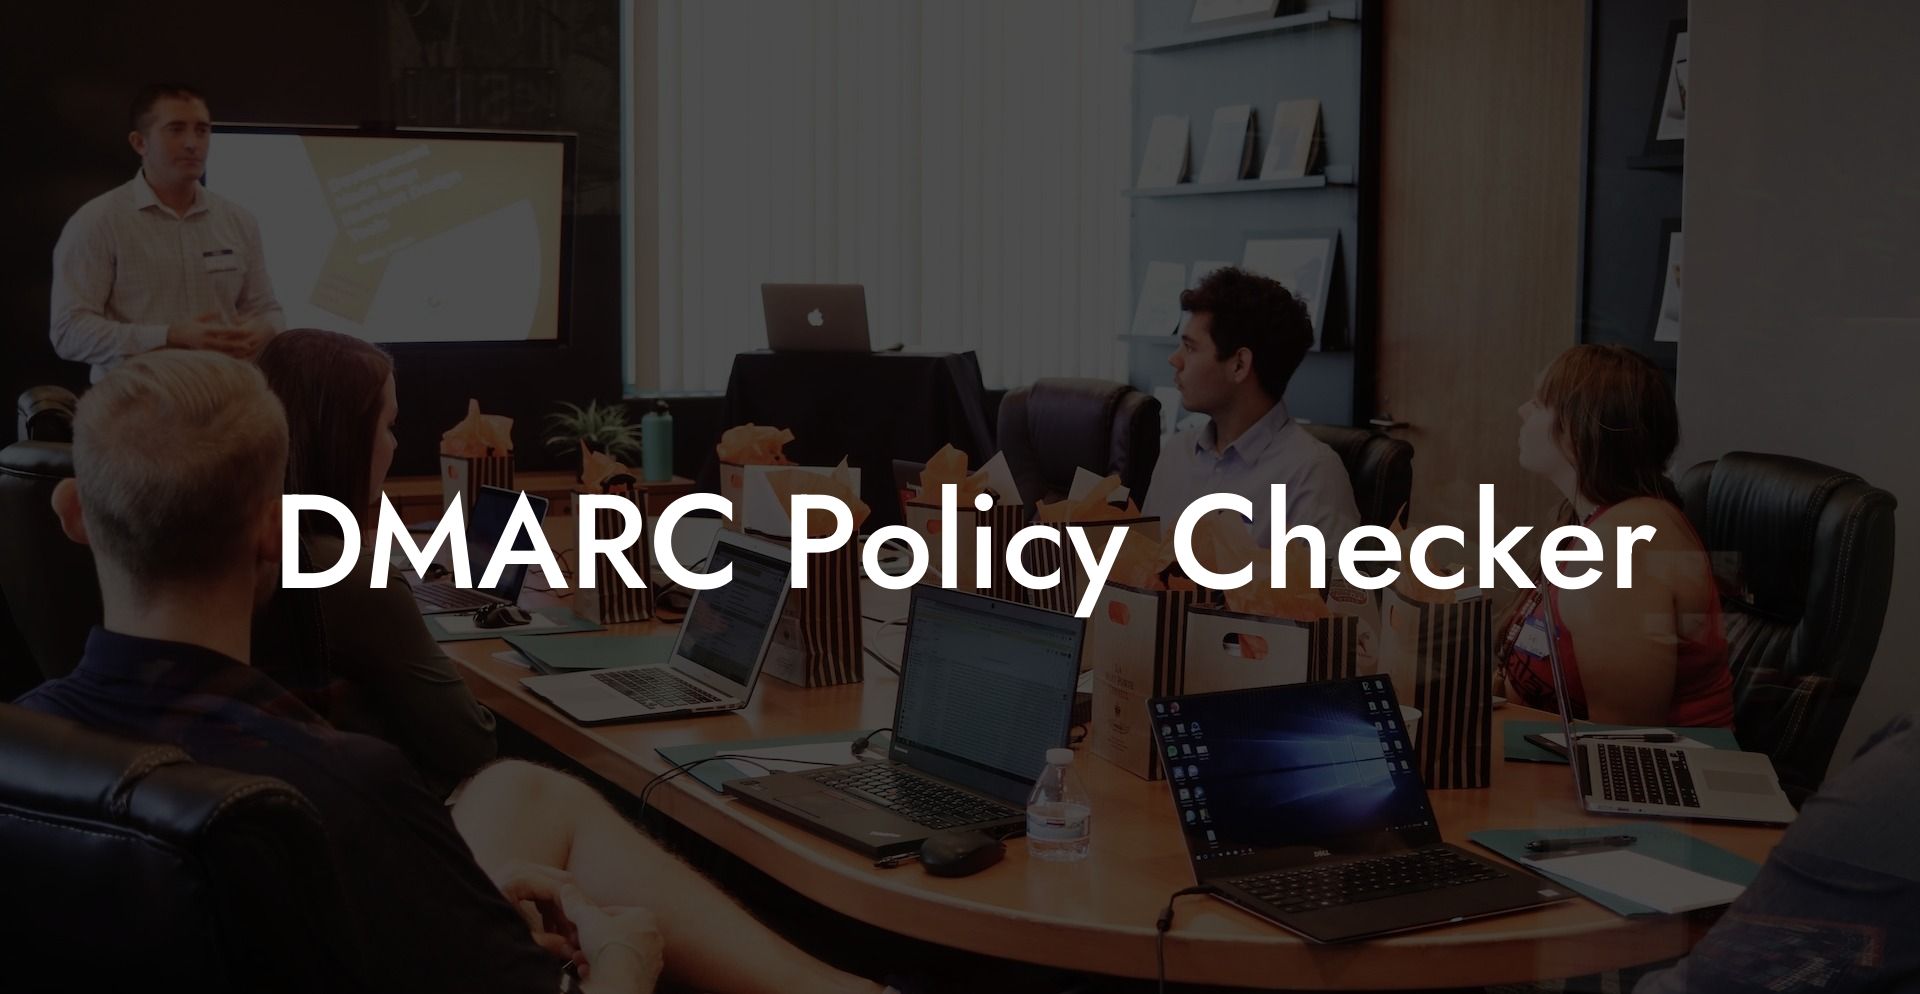 DMARC Policy Checker